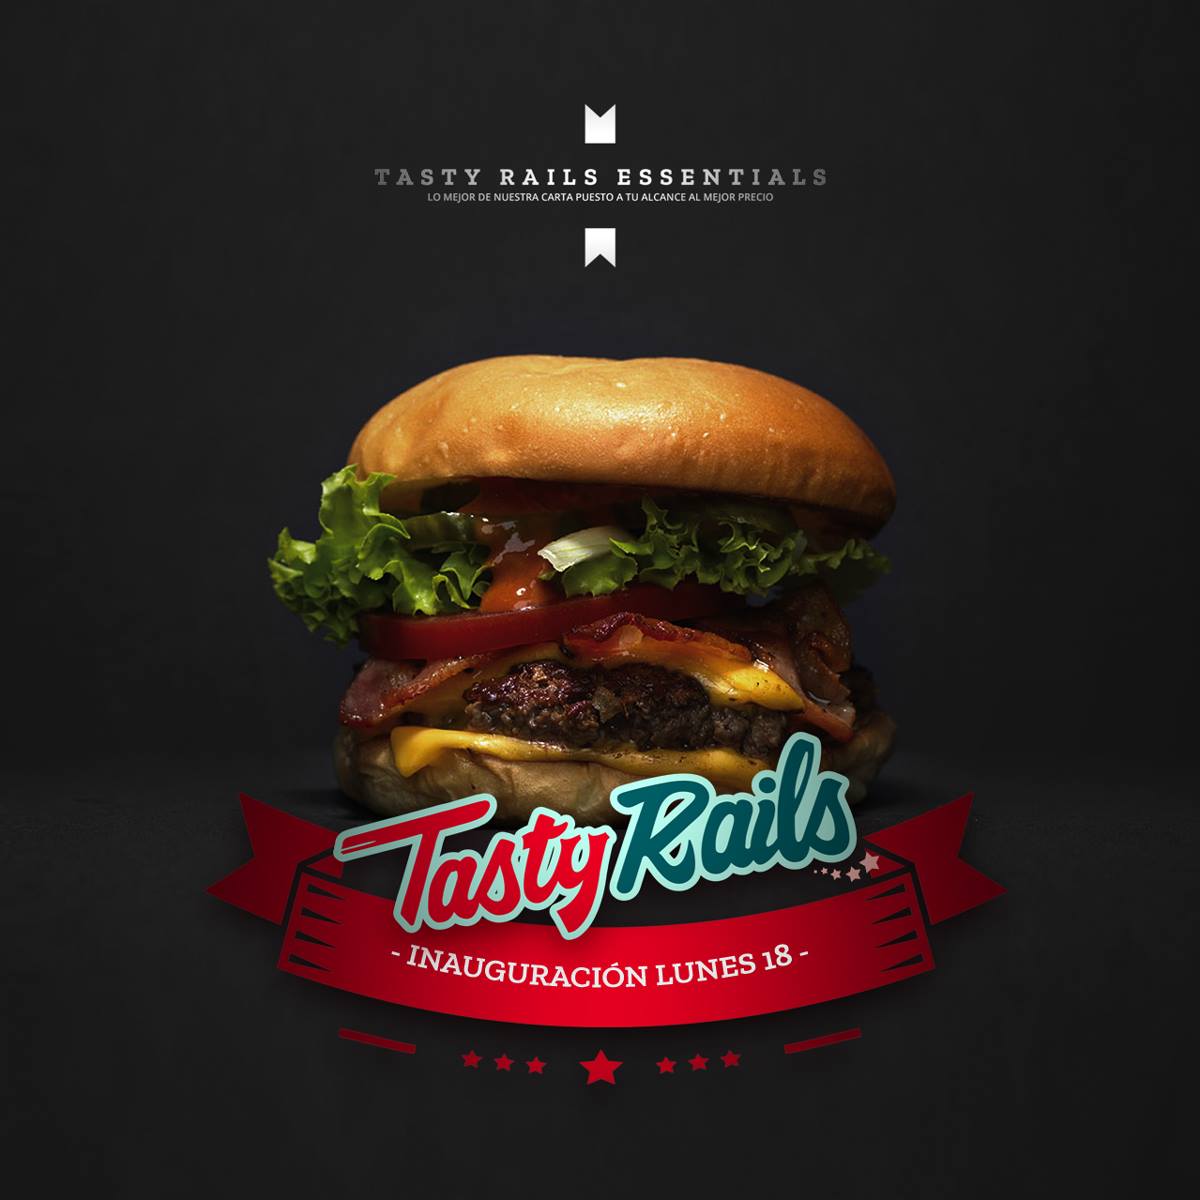 Material redes sociales Tasty Rails by UMM ideas SA